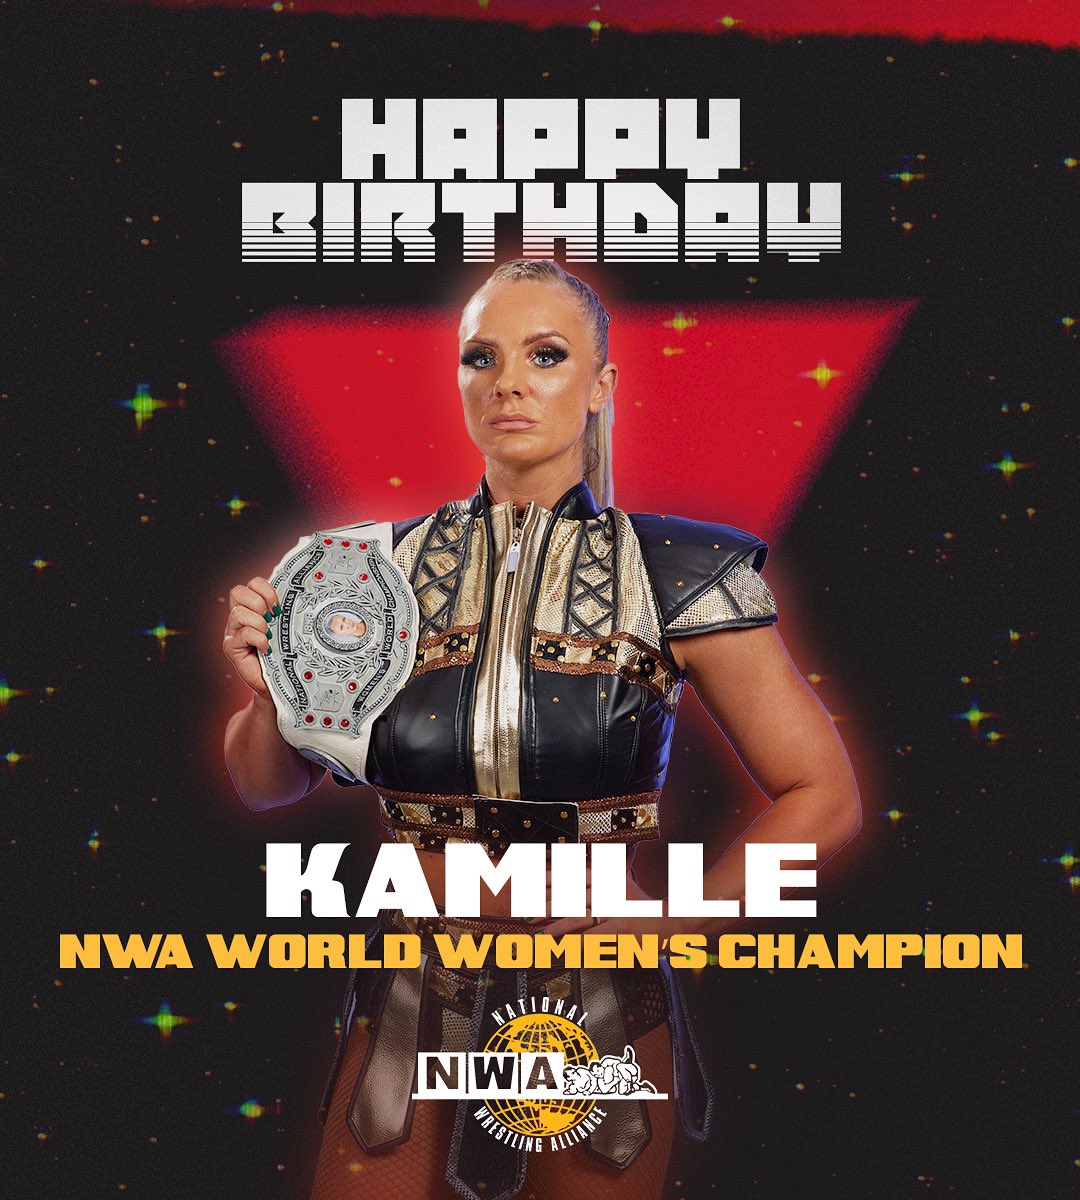 Please join us in wishing a VERY happy birthday to our NWA World Women’s Champion, @Kamille_brick!! Over 500 days as champion and the Burke is looking better than ever over your shoulder!! 👊❤️ #onetime #brickhouse #nwawrestling